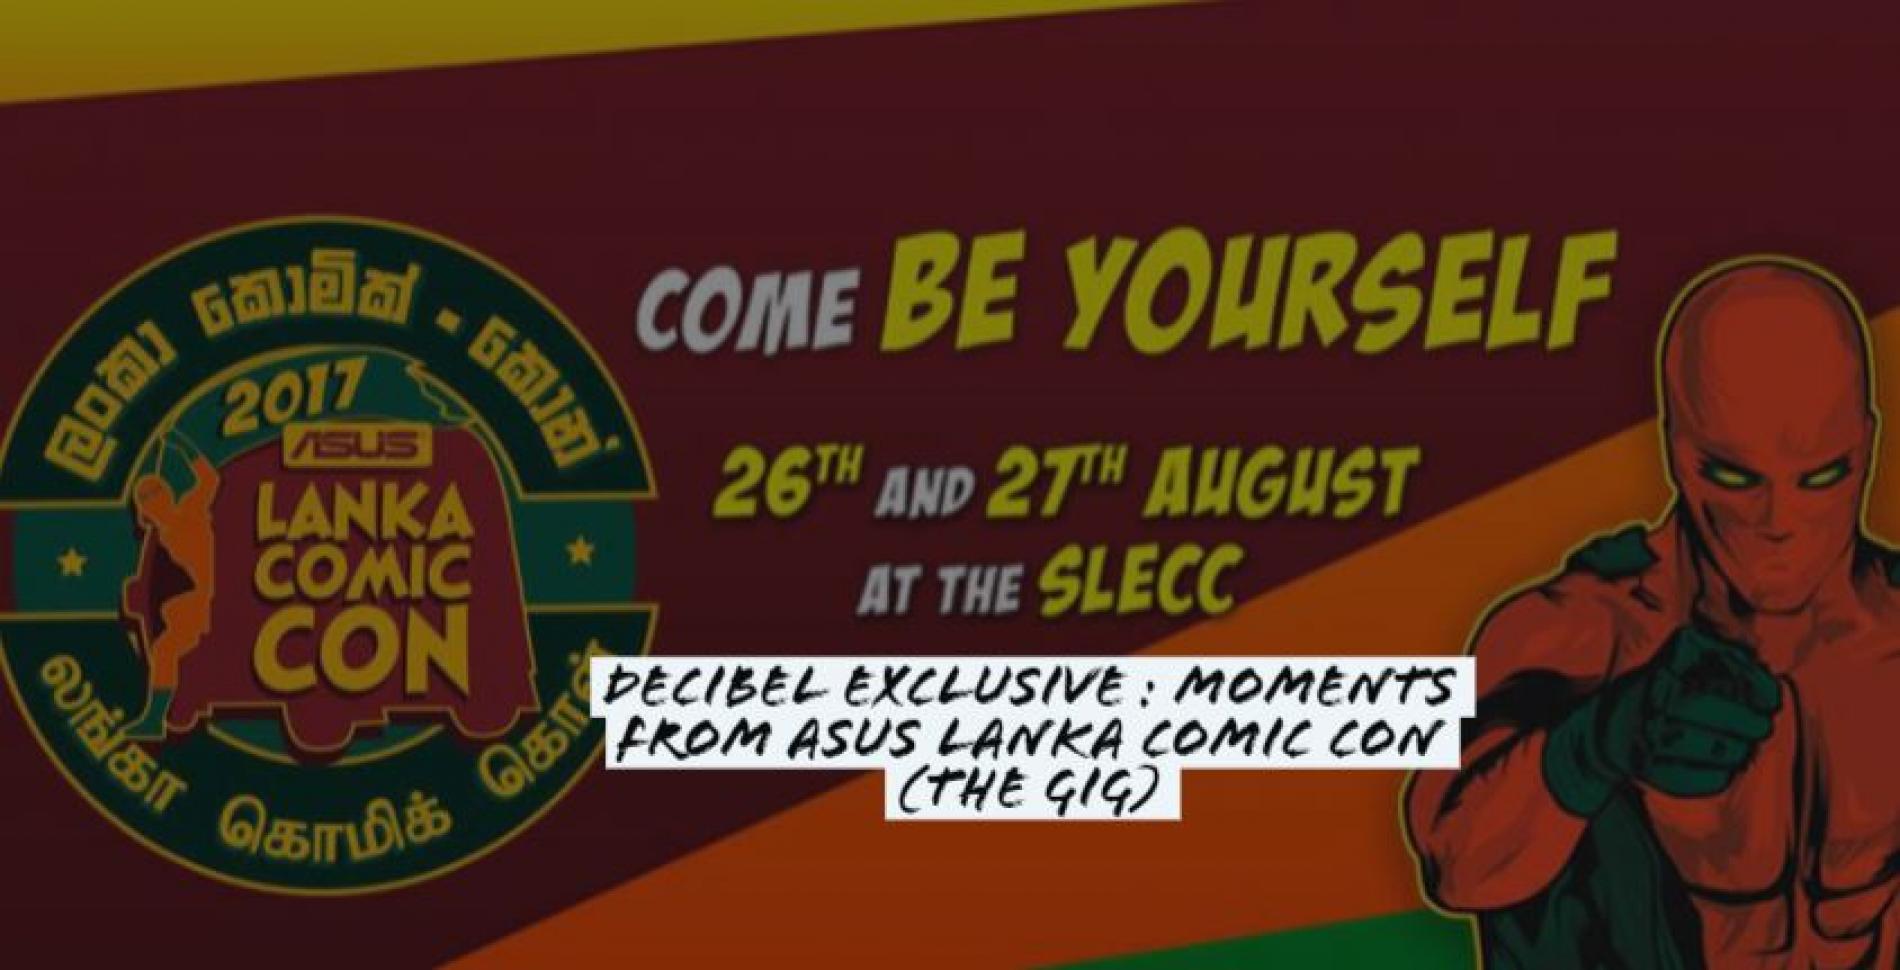 Decibel Exclusive : Moments From Lanka Comic Con (The Gig)